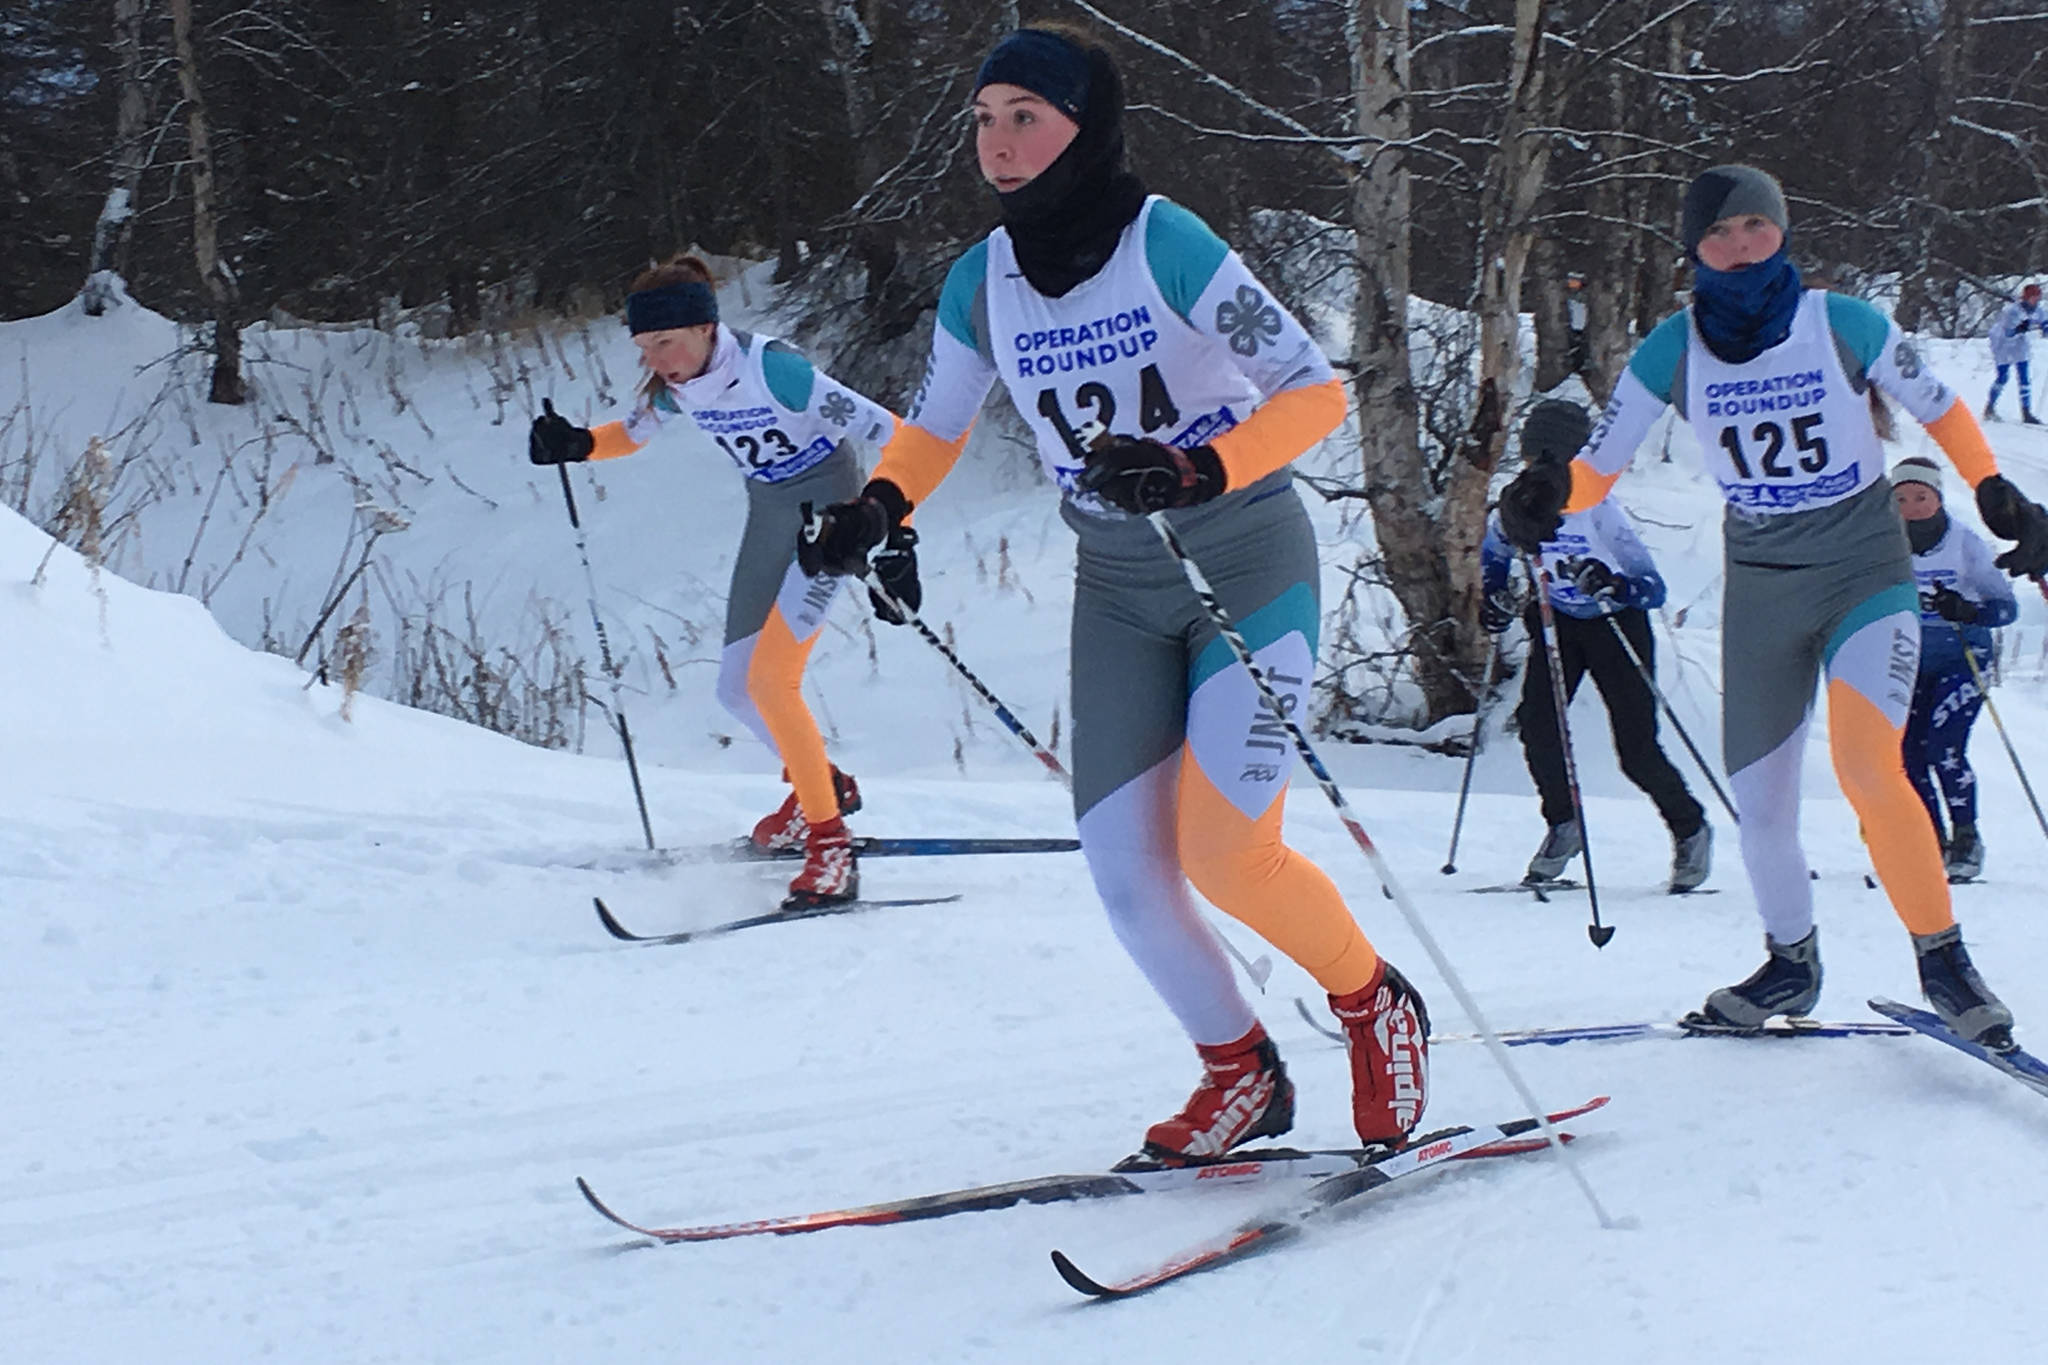 The Juneau Nordic Ski Team’s Katie McKenna leads Annika Schwartz, left, and Linnea Lentfer up a hill during the 5-kilometer high school girls mass-start classic race during the second day of the Government Peak Recreation Area Invitational in Palmer on Saturday. McKenna took 21st with a time of 24 minutes, 19.2 seconds. Schwartz placed 22nd and Lentfer placed 27th. Anna Iverson (25th), Melia Lu Trousil (28th) and Lindsay McTague (20th) also competed in the race for Juneau. (Courtesy Photo | Merry Ellefson)